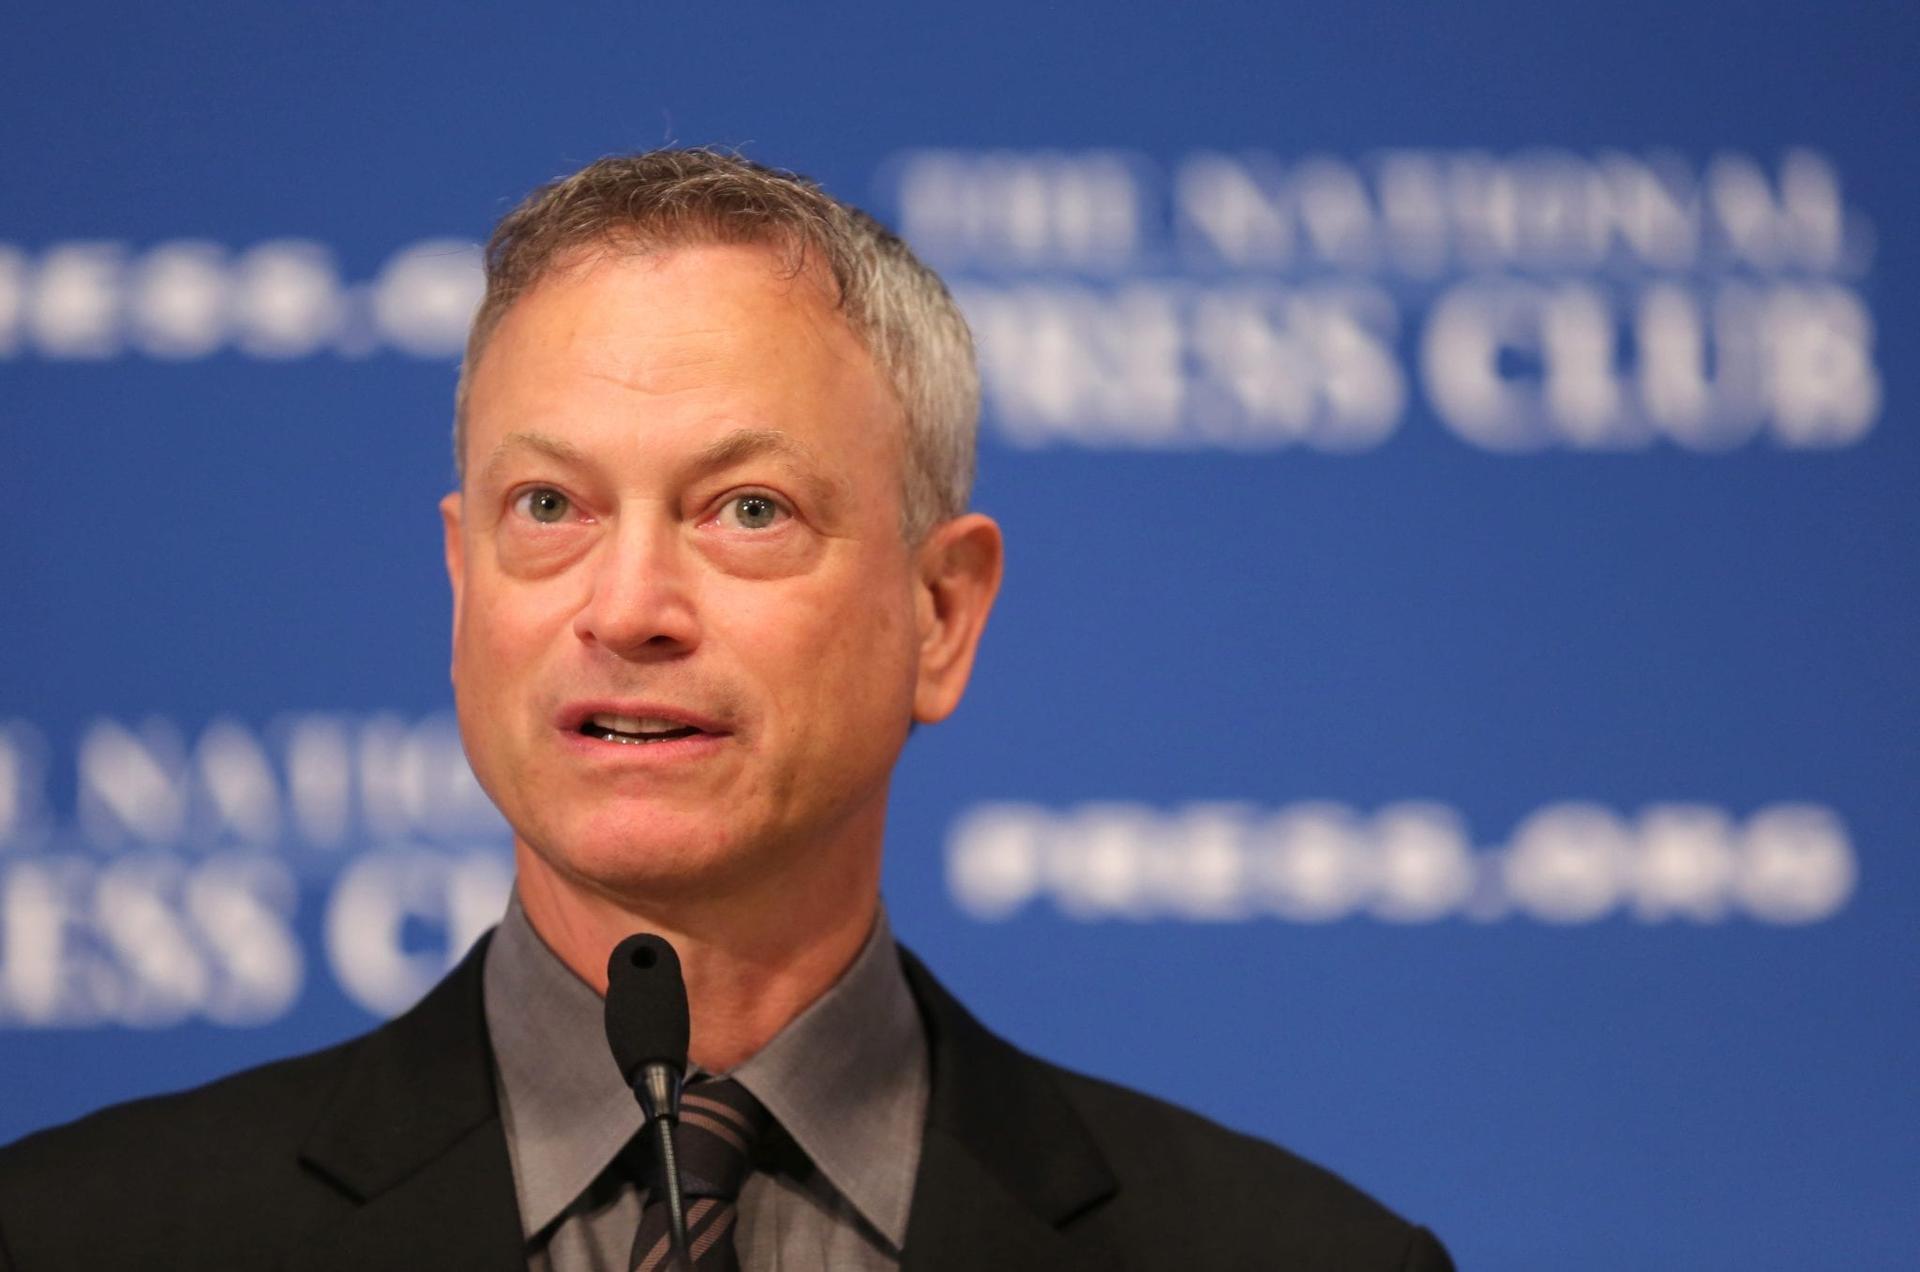 Actor Gary Sinise describes his road to the Catholic Church